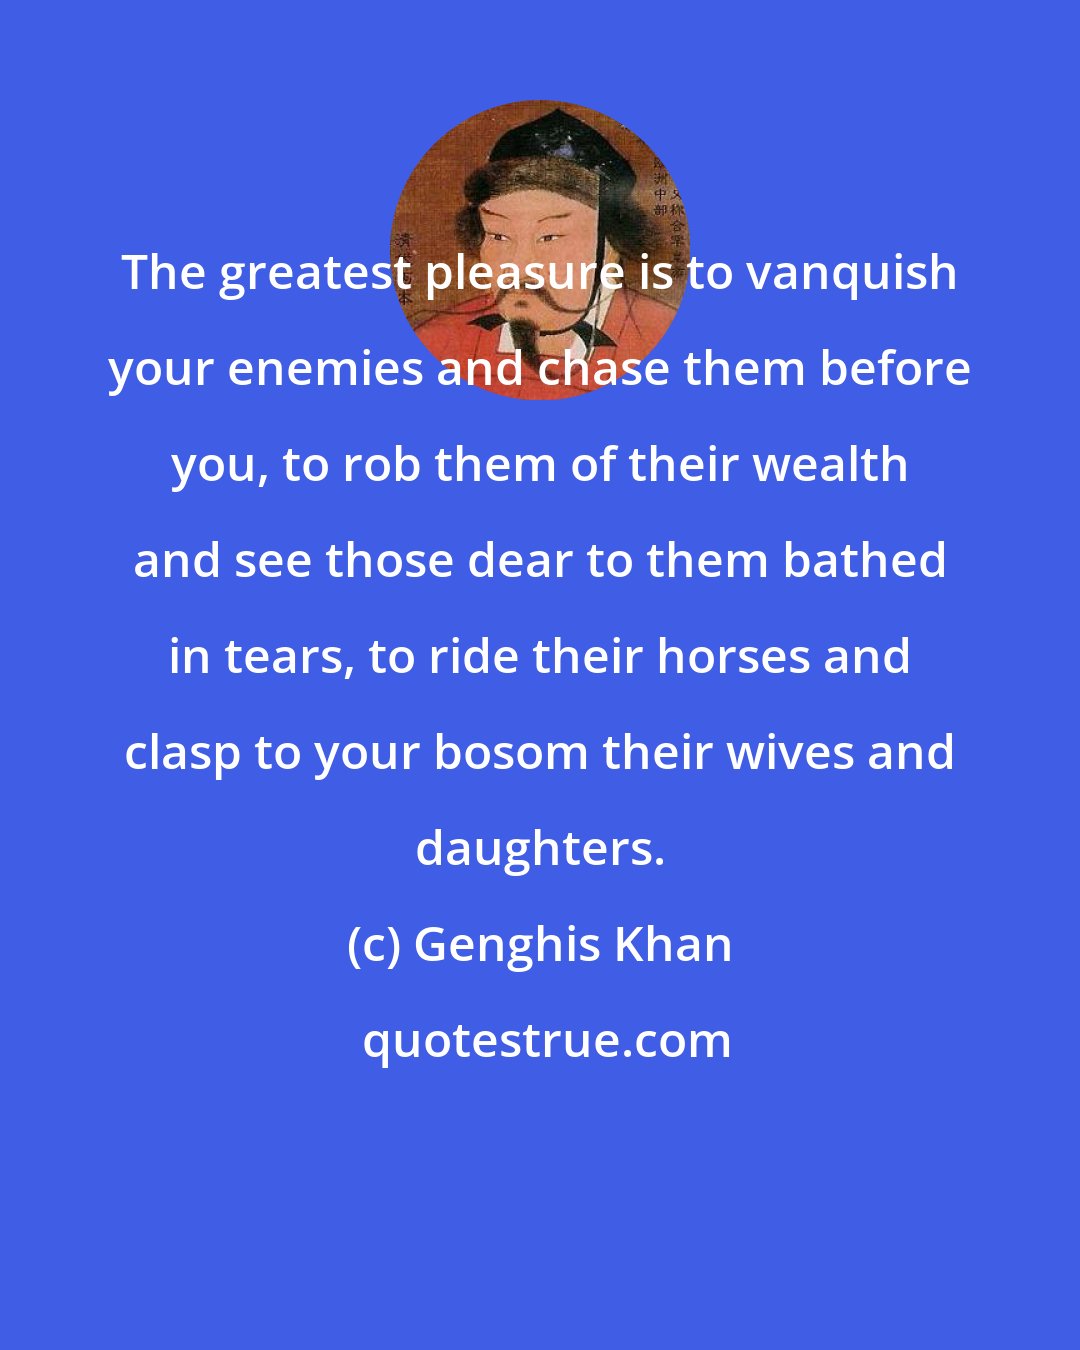 Genghis Khan: The greatest pleasure is to vanquish your enemies and chase them before you, to rob them of their wealth and see those dear to them bathed in tears, to ride their horses and clasp to your bosom their wives and daughters.